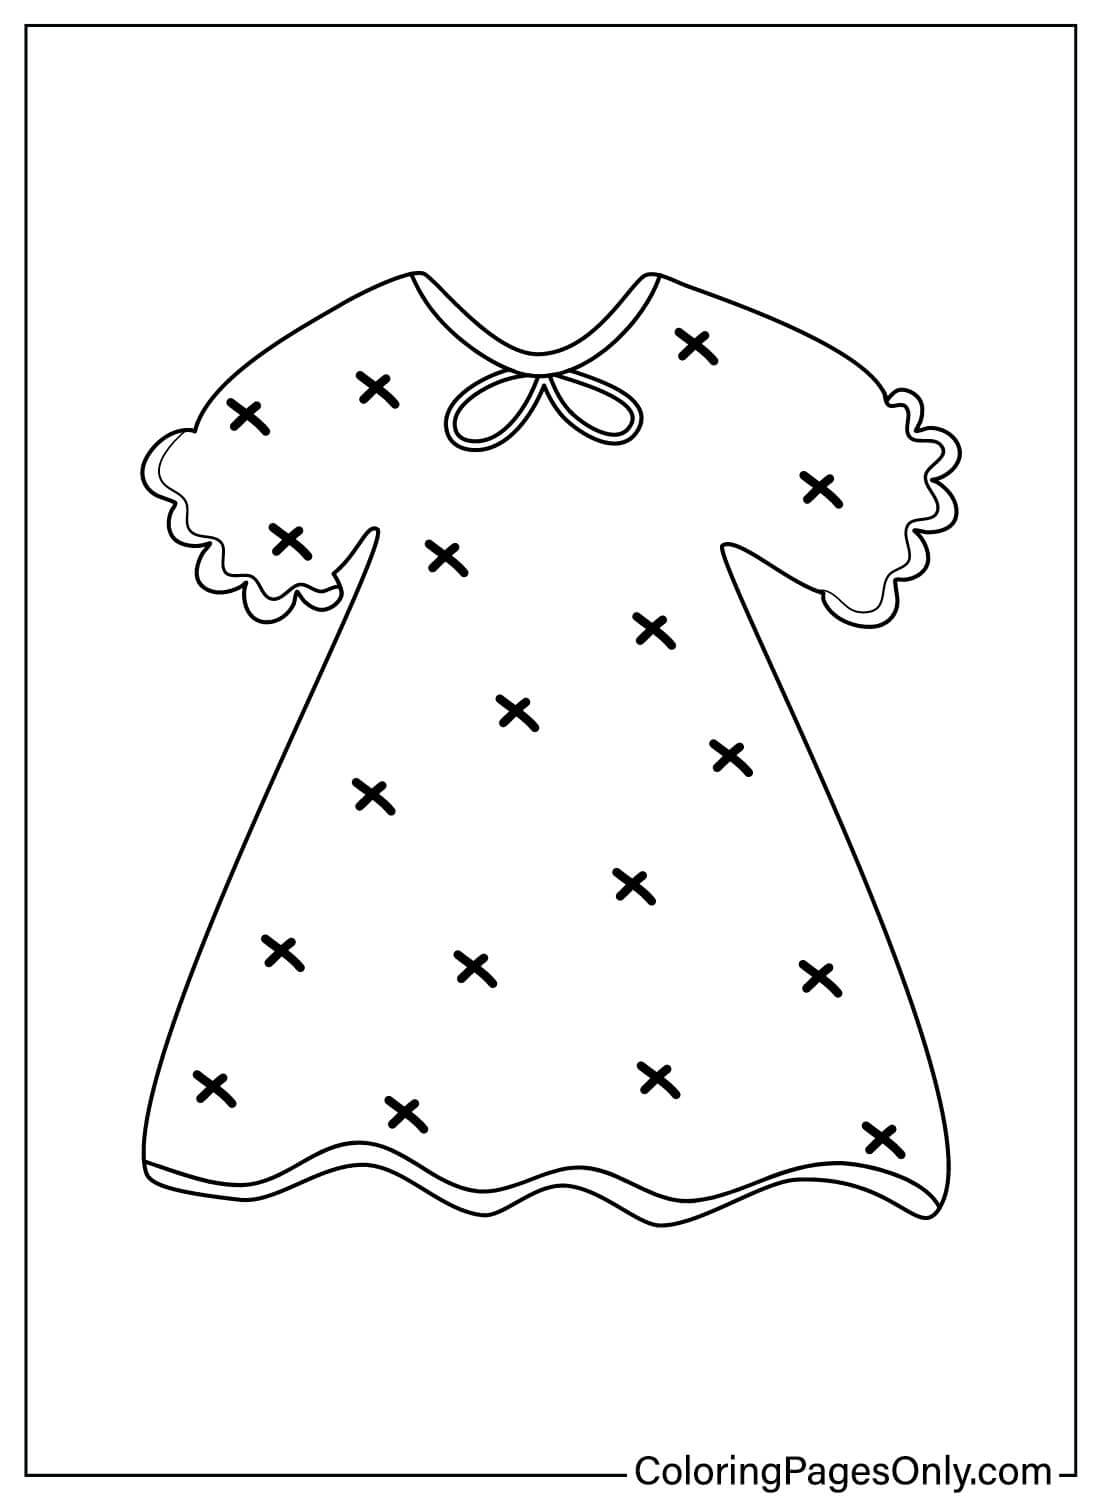 Free Baby Dress Coloring Sheet - Free Printable Coloring Pages